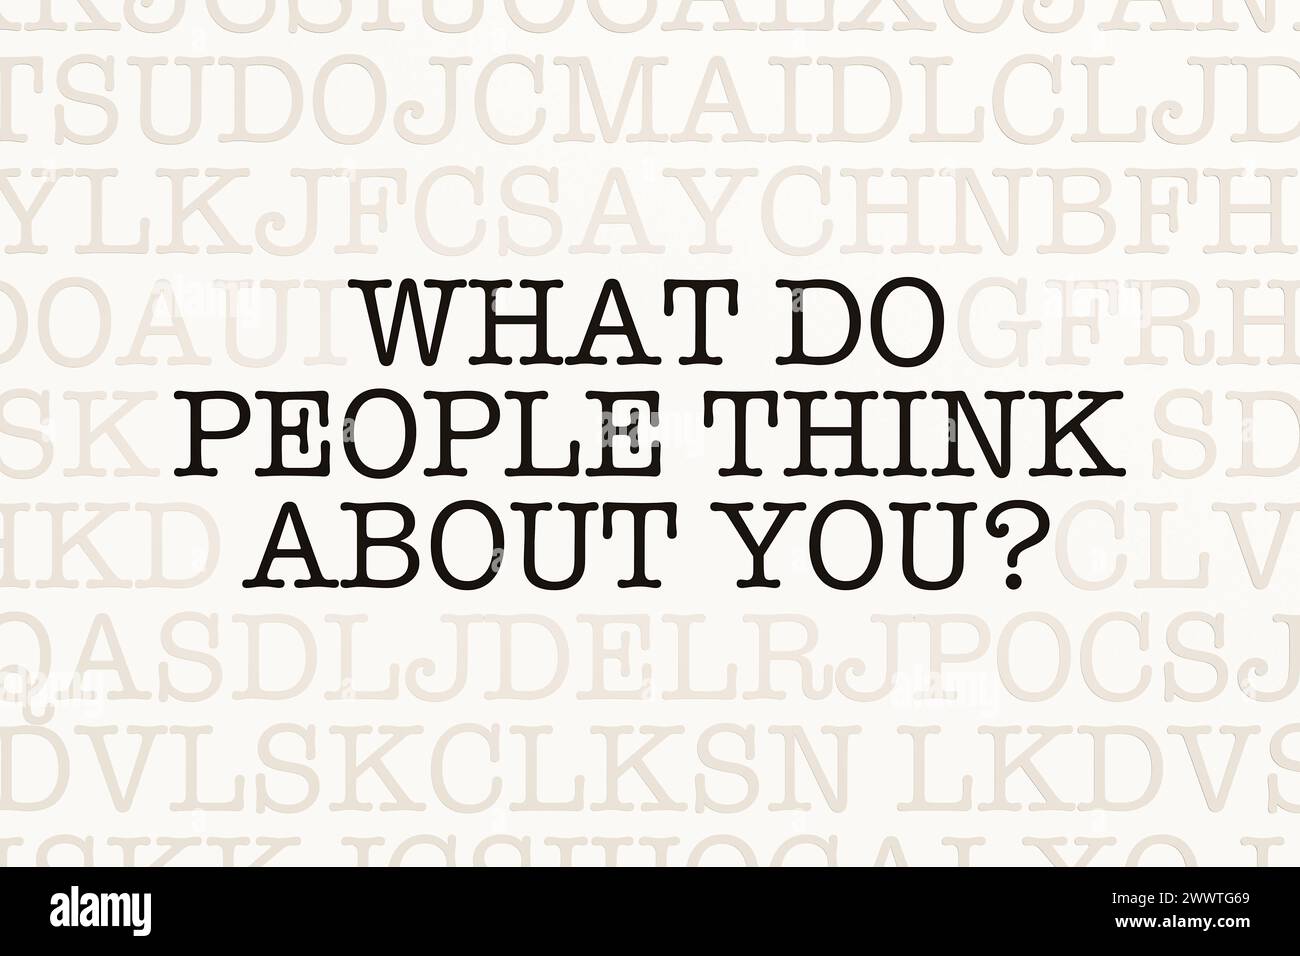 What do people think about you What do people think about you Page with letters in typewriter font. Part of the text in dark color. Appearance, self c Stock Photo